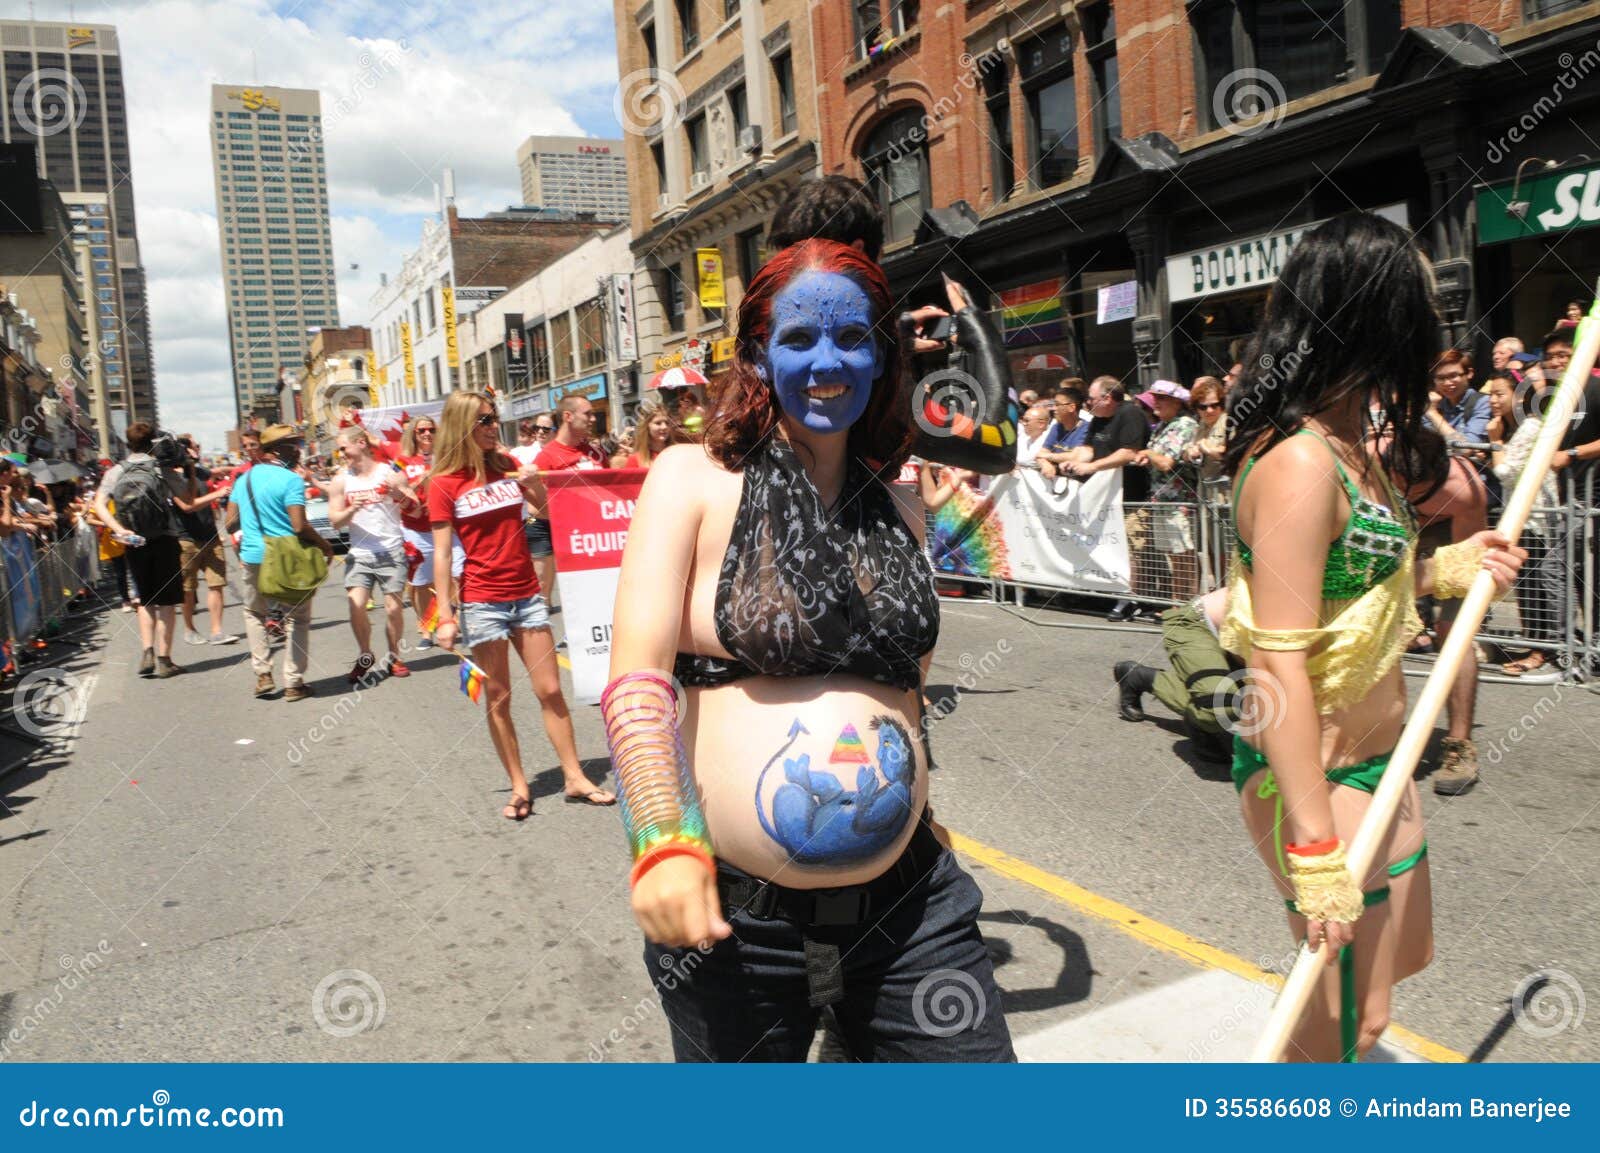 pride-toronto-june-activist-painting-her-would-be-child-her-belly-parade-june-toronto-canada-35586608.jpg